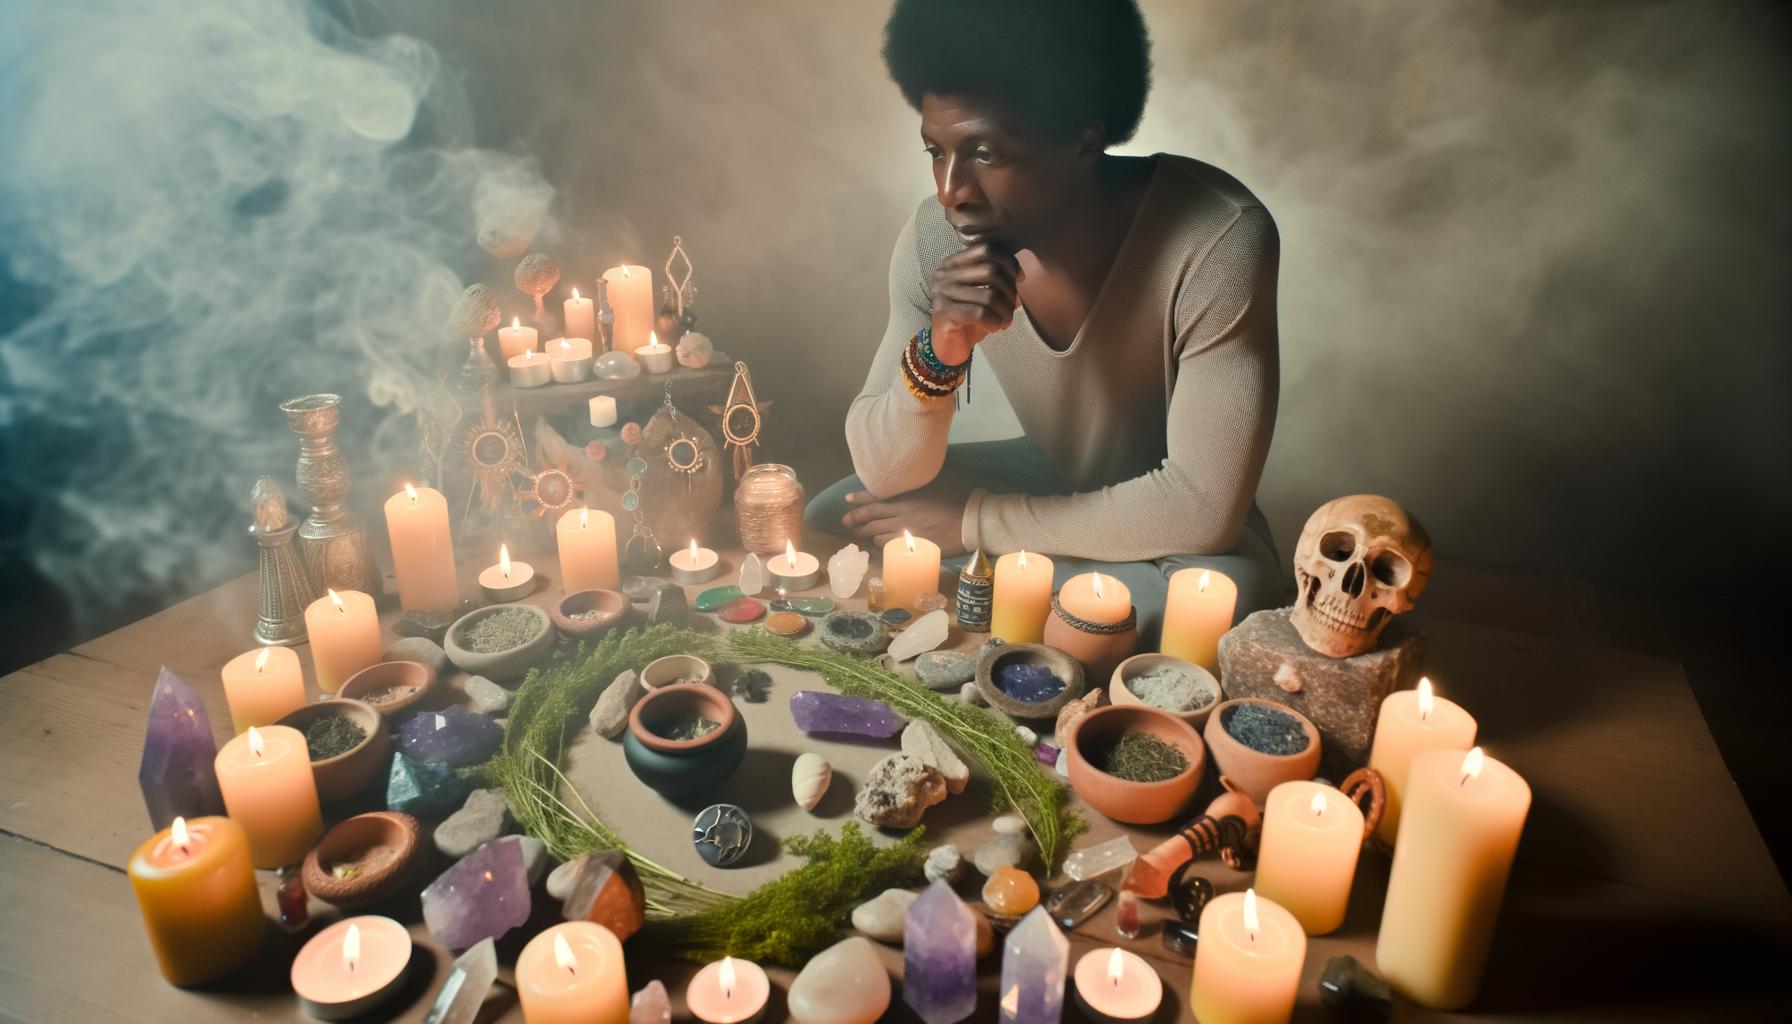 An image of a african american person surrounded by candles, crystals, herbs, and other mystical items, sitting in a circle and visualizing their deep-1